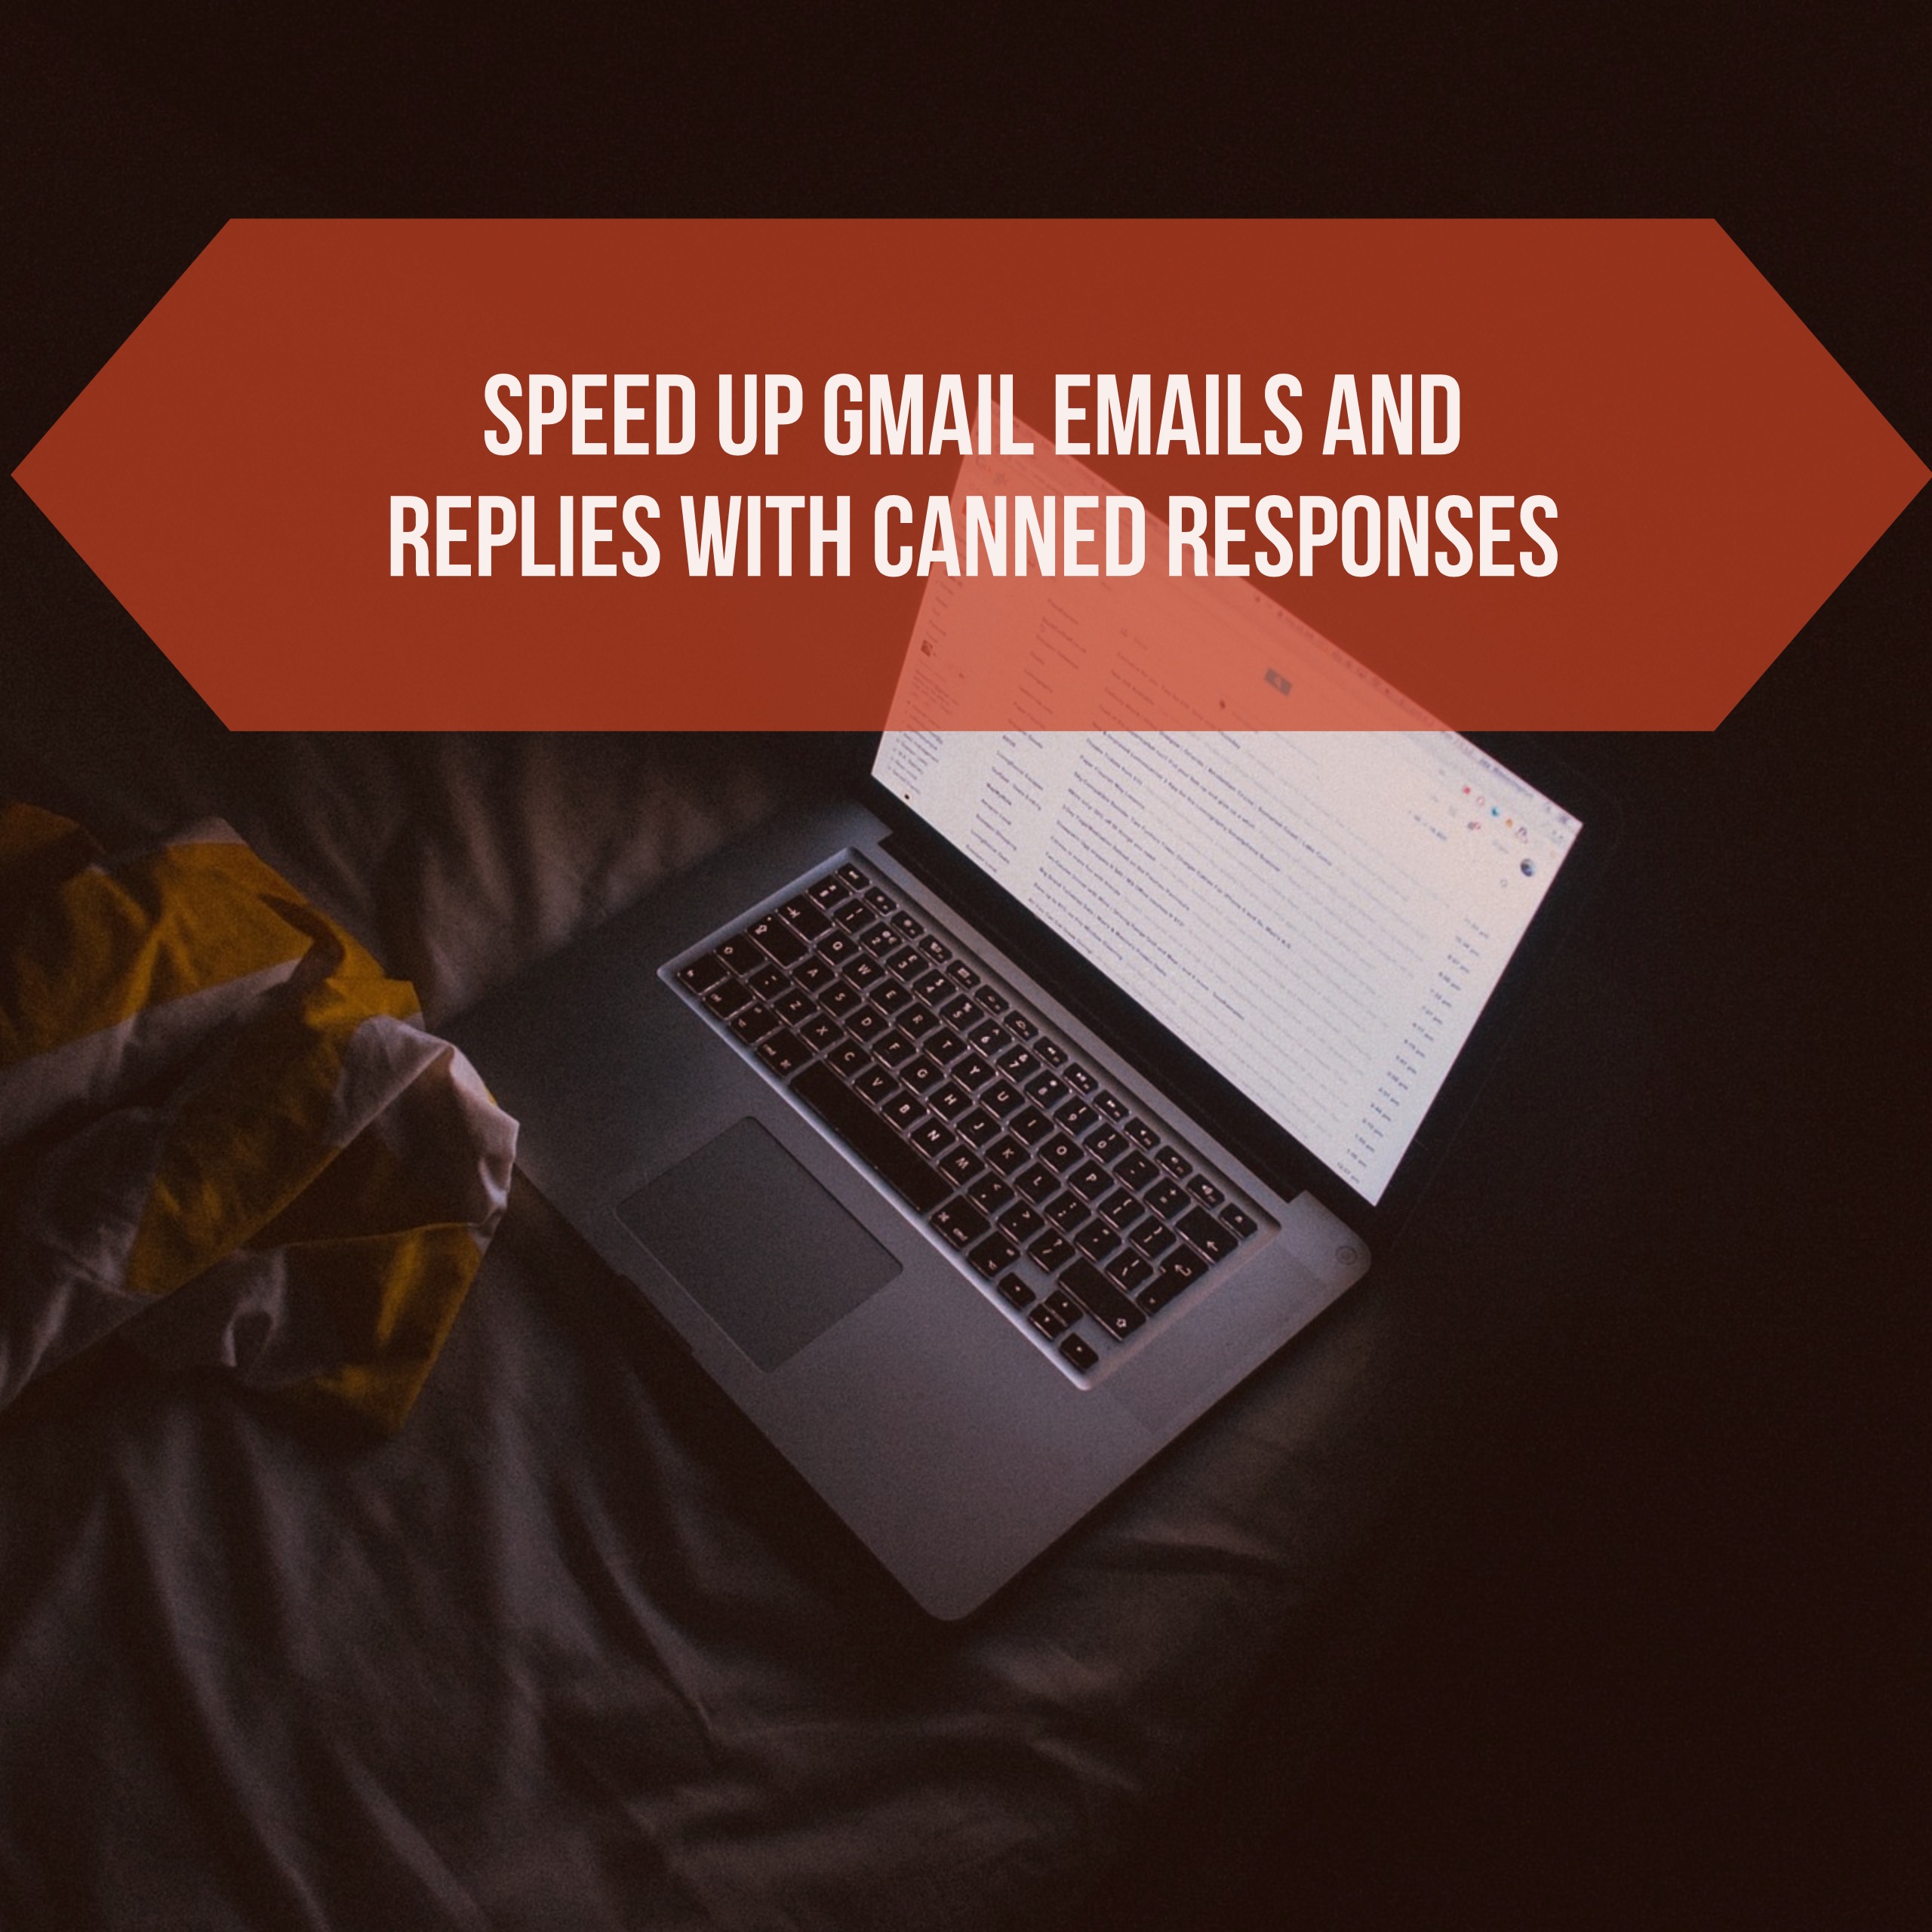 Speed up Gmail emails and replies with Canned Responses